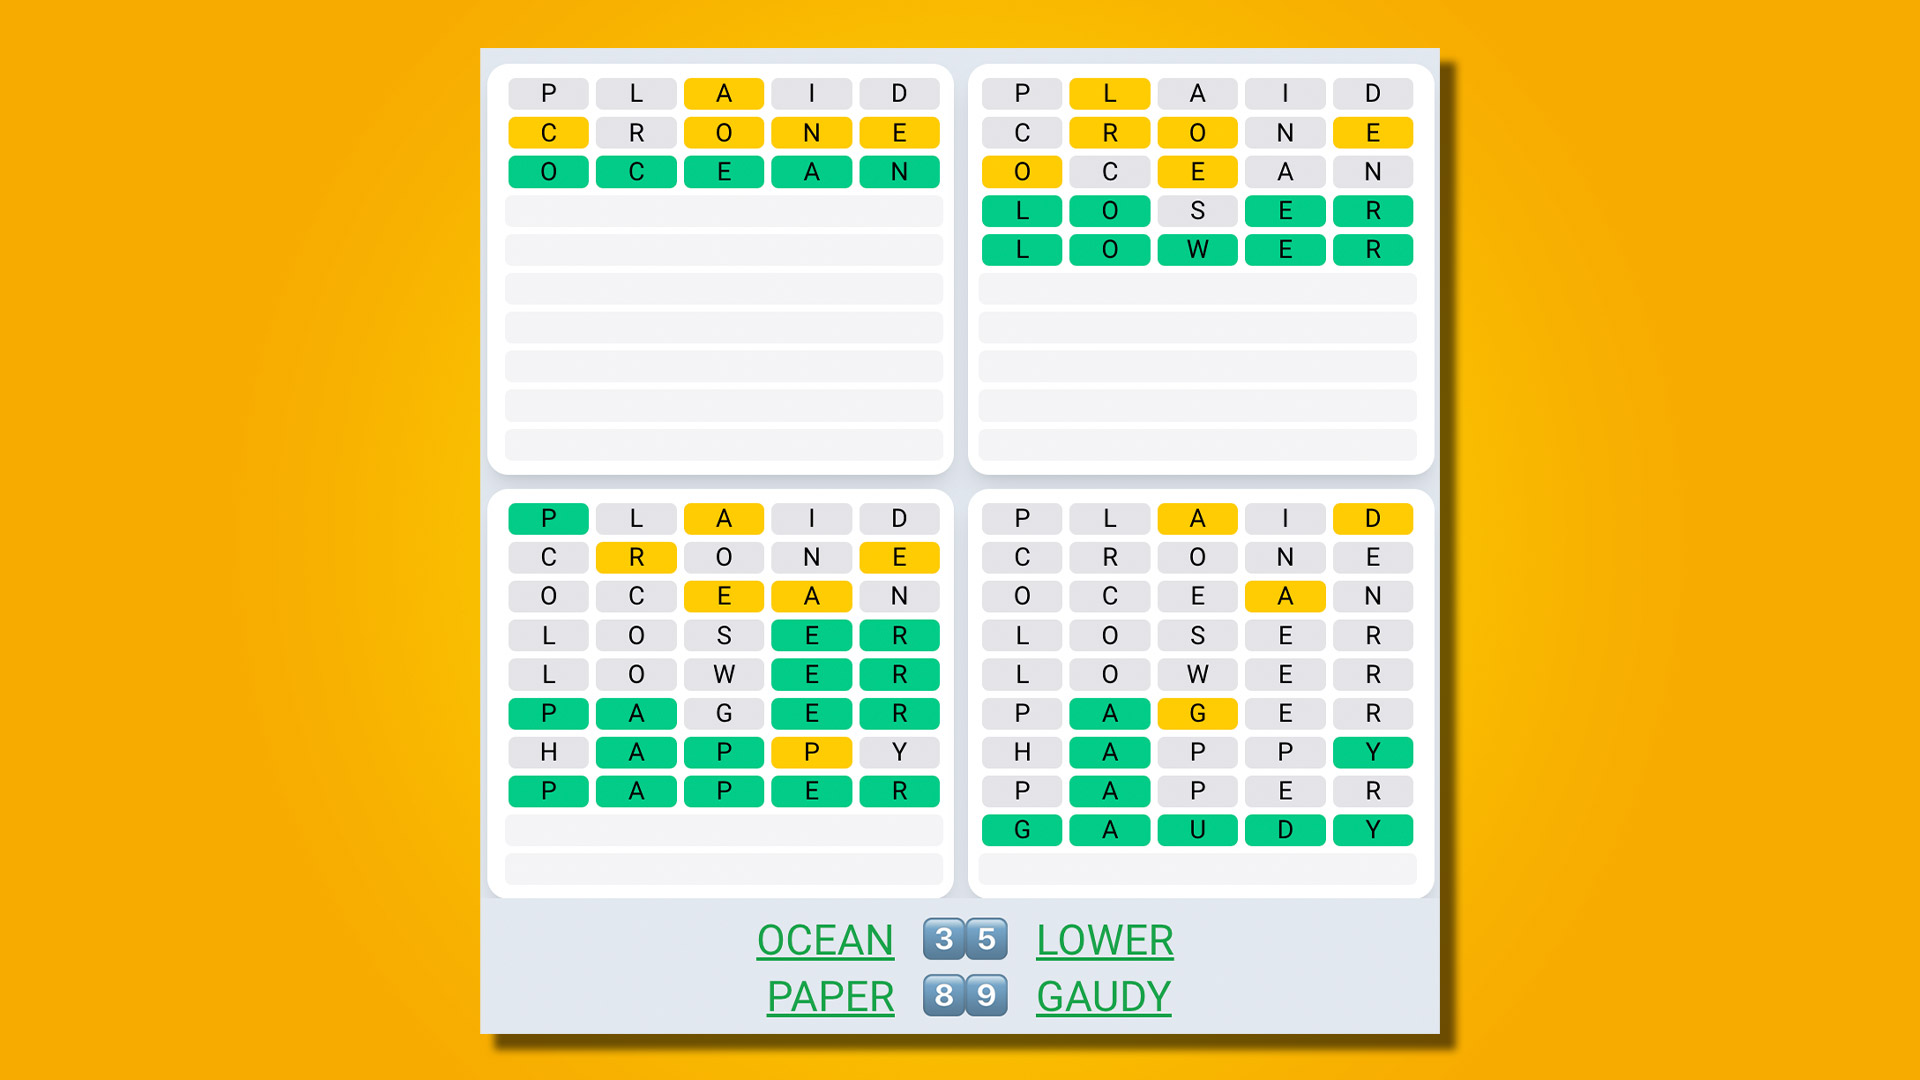 Quordle Daily Sequence answers for game 511 on a yellow background